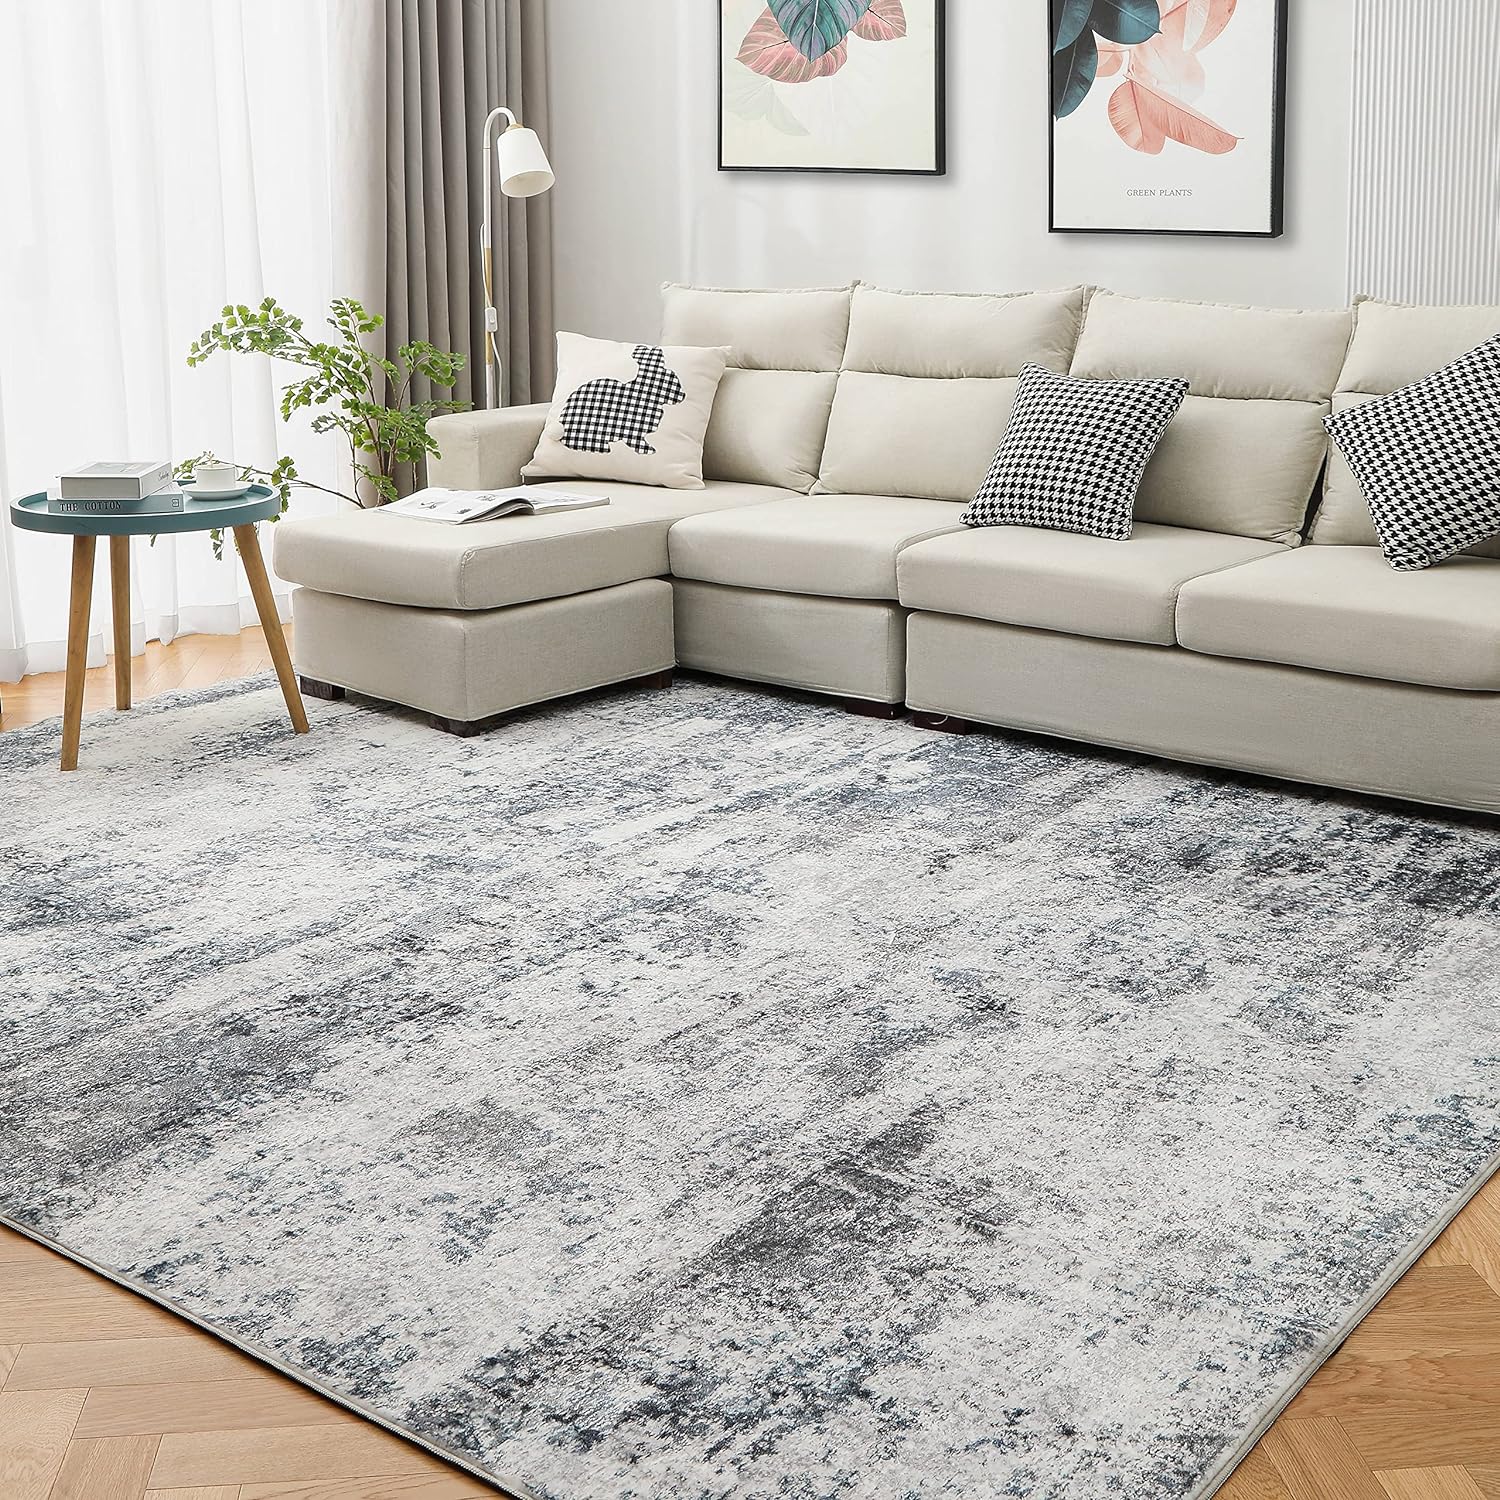 Hottest Amazon Deal Today: Area Rug Living Room Rugs - Save 38%!